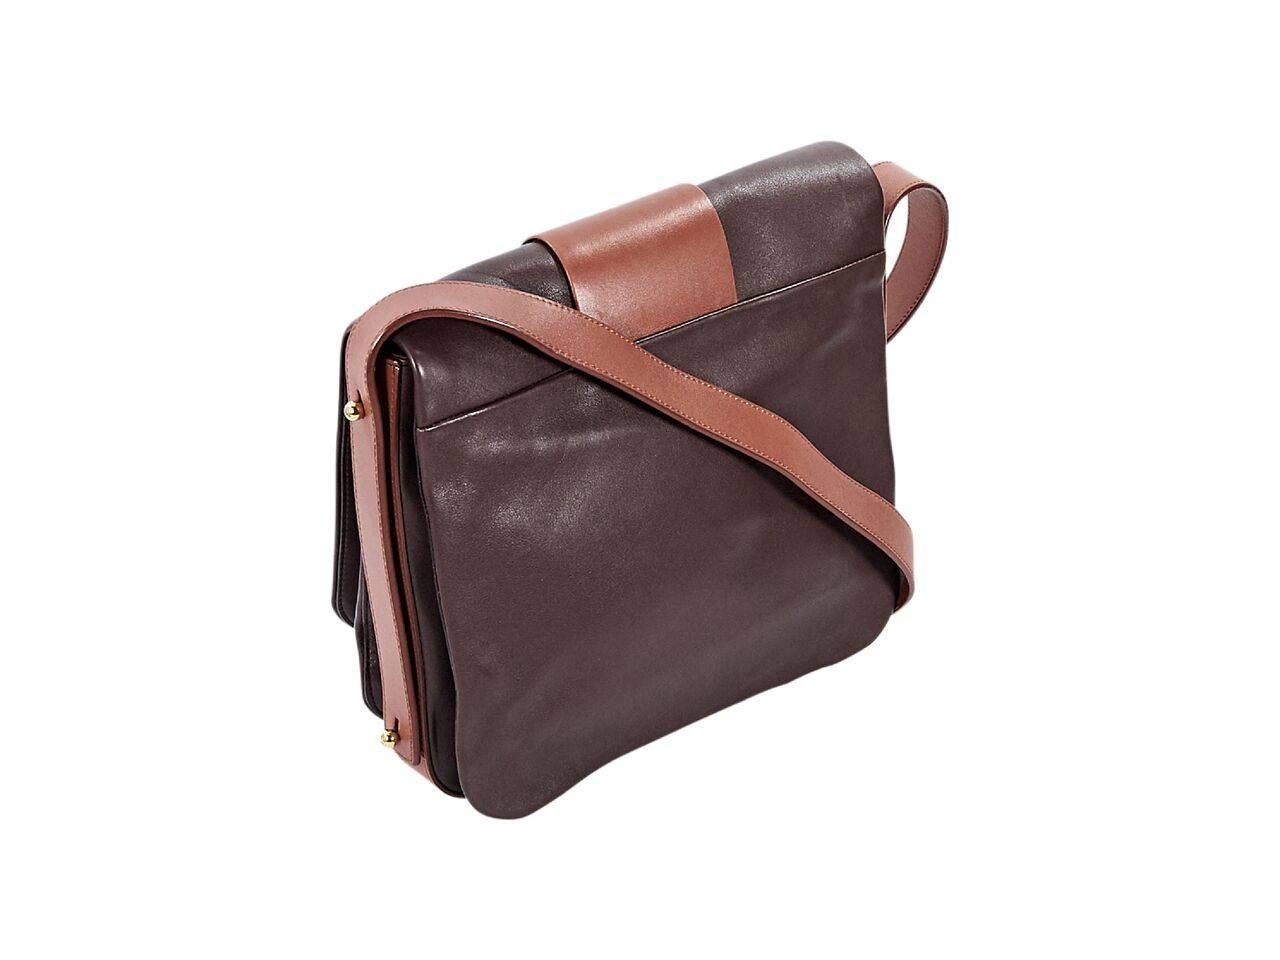 Product details:  Brown and tan leather Black Orchid shoulder bag by Marc Jacobs.  Single shoulder strap.  Front flap with clasp closure.  Leather interior with inner open compartments and inner zip and slide pockets.  Goldtone hardware.  Dust bag